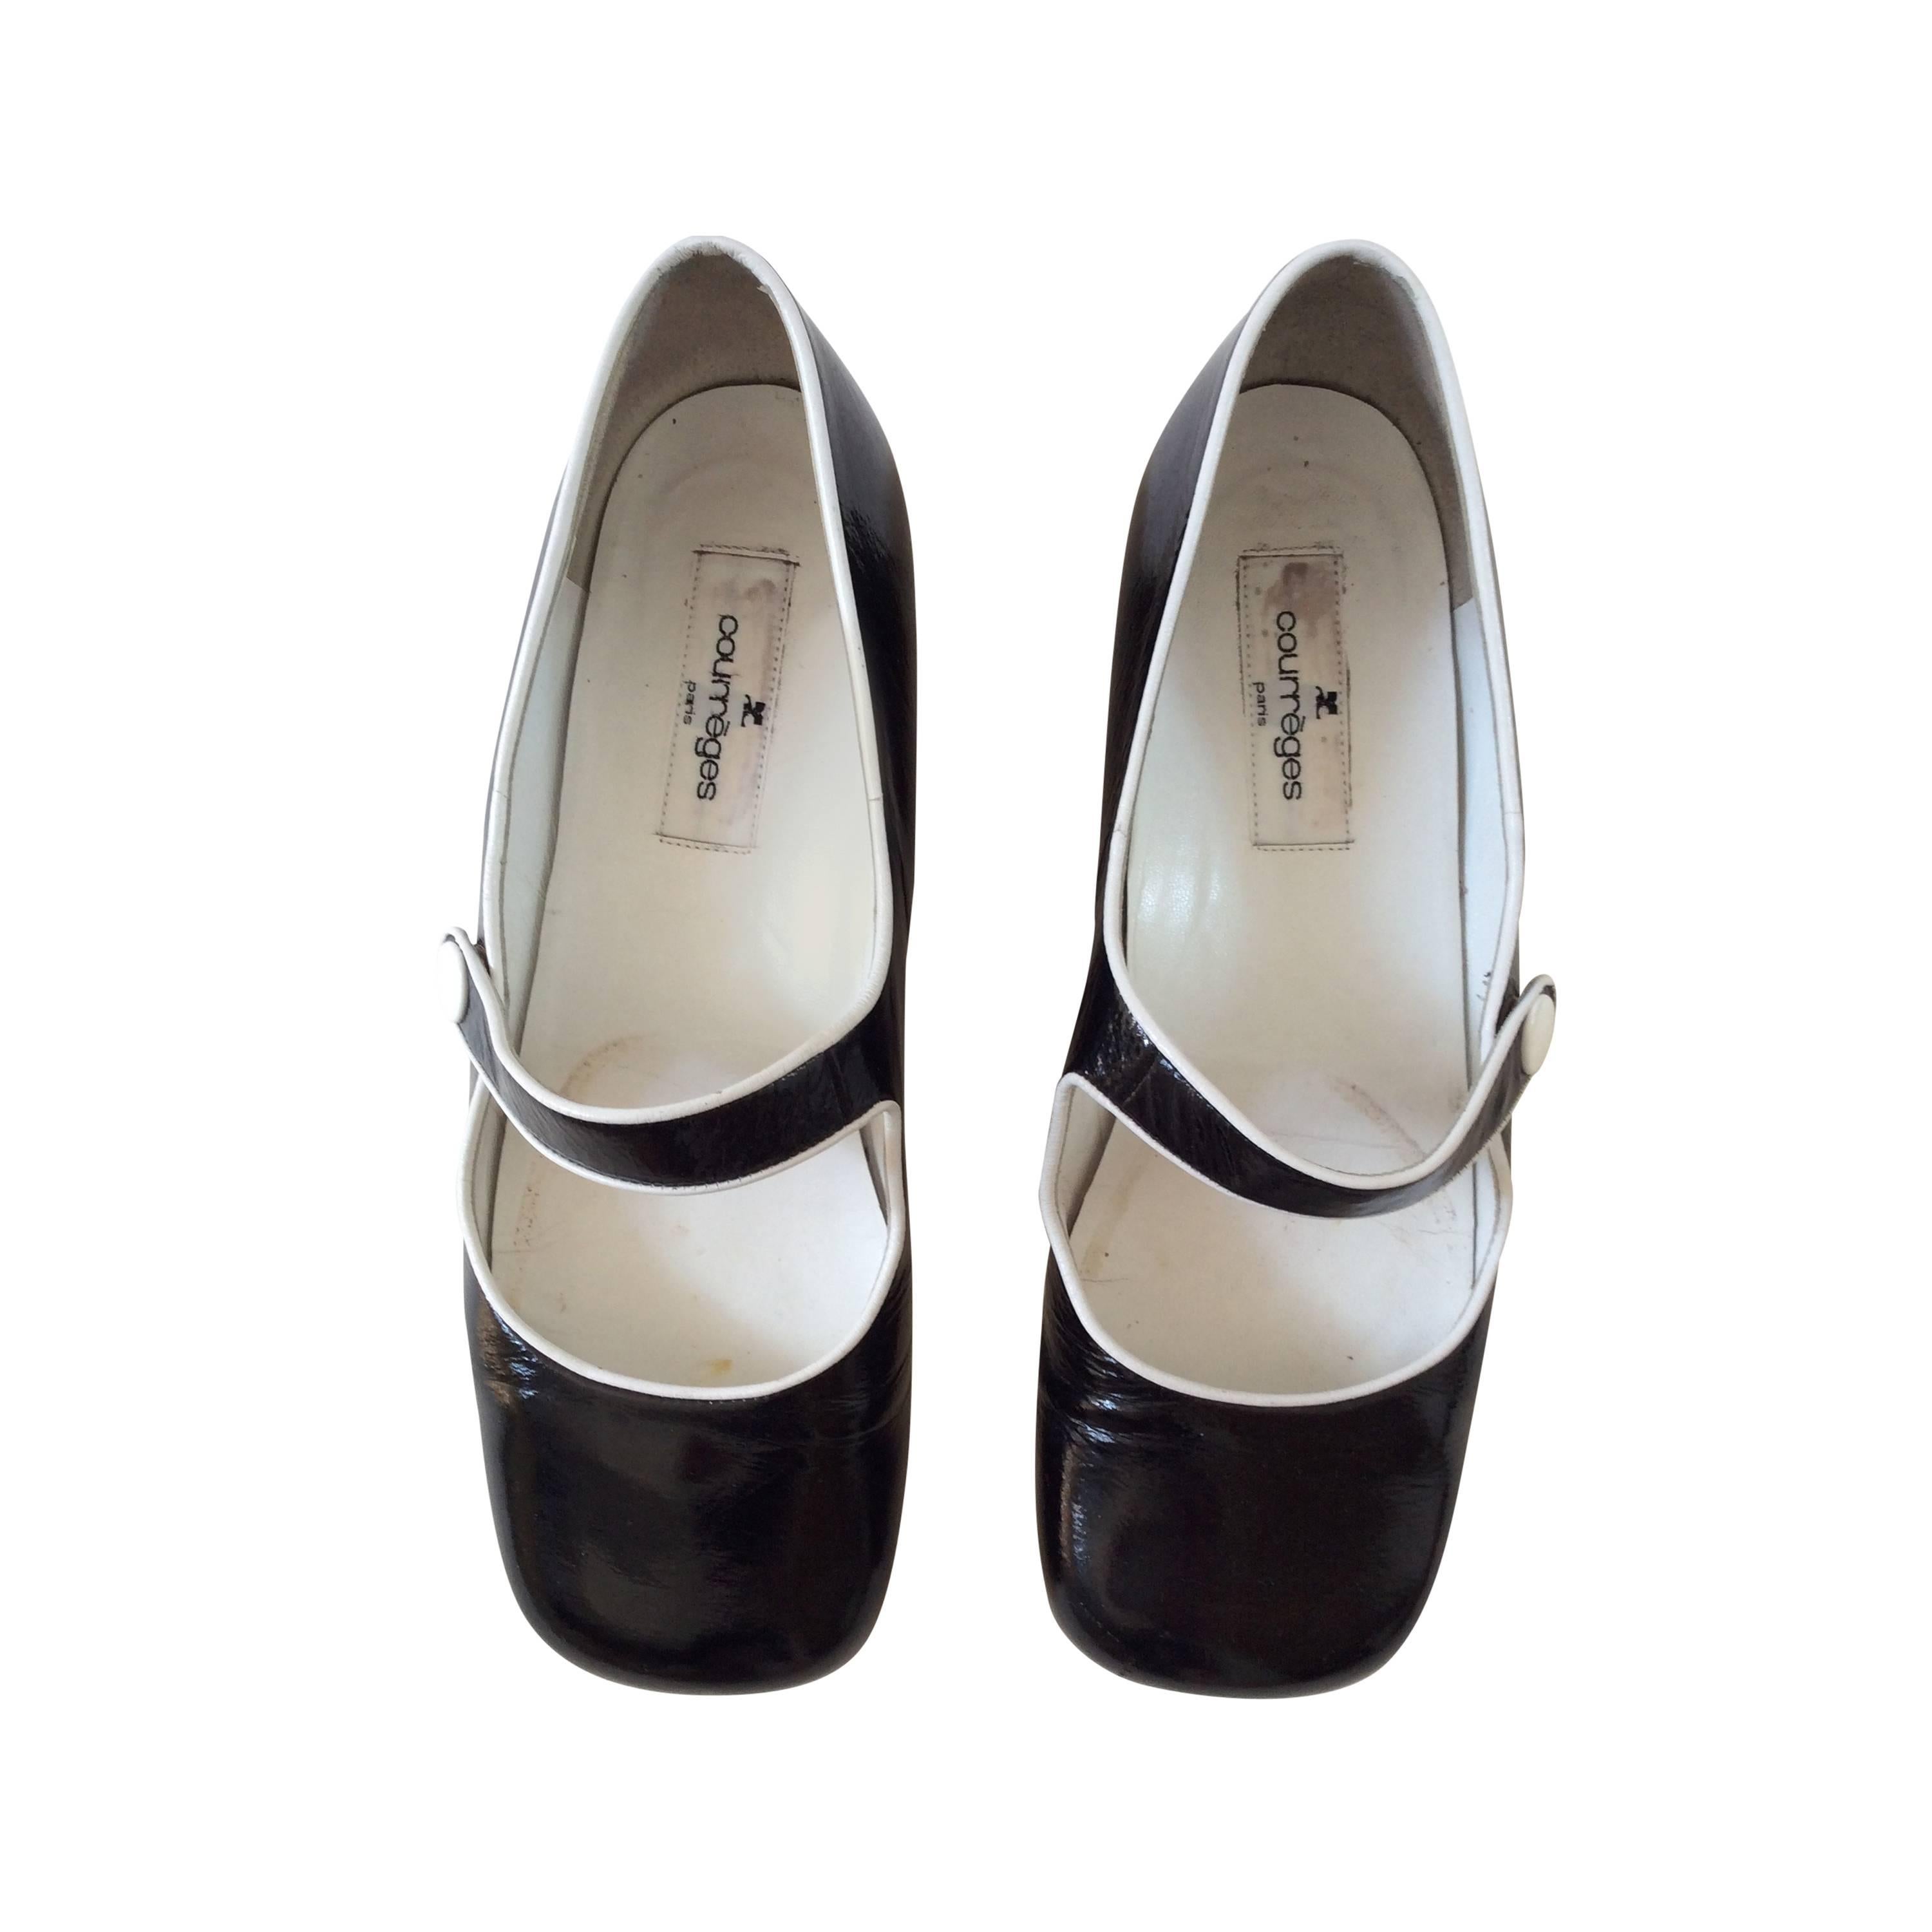 Courreges Mary Jane Shoes - 1980's - Size 37 - Extremely Rare For Sale